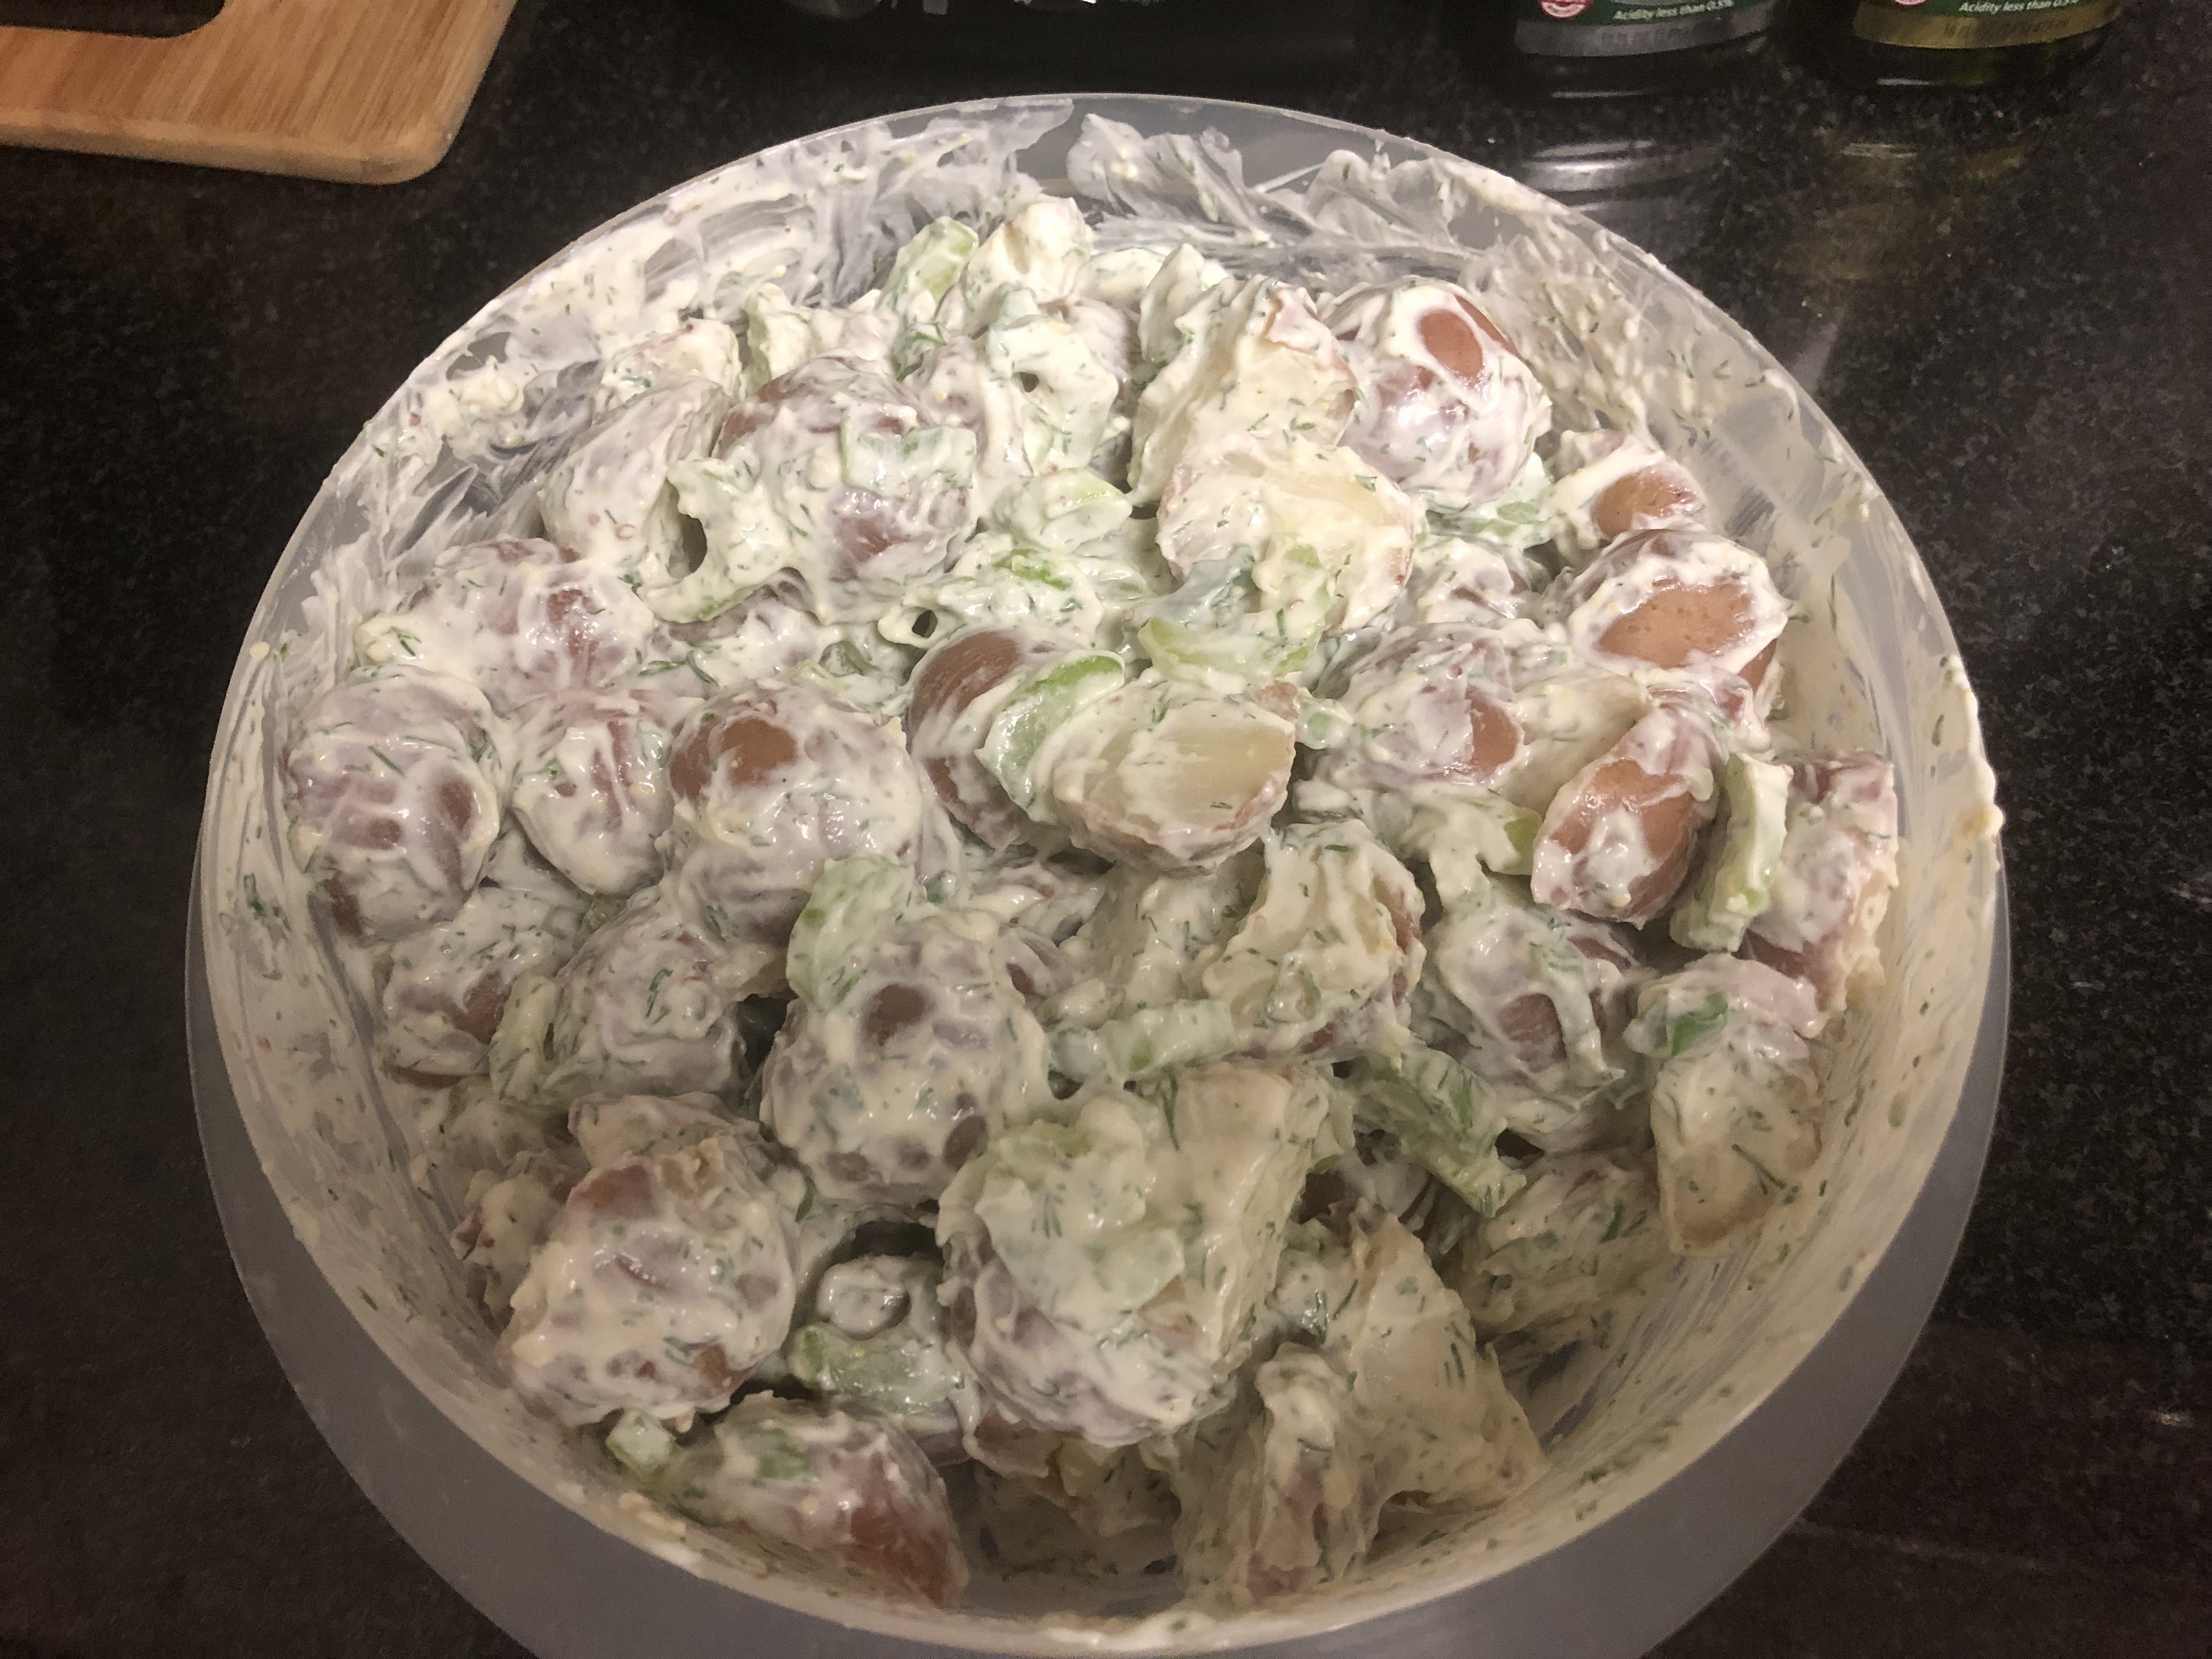 Potato Salad shown filling a large tupperware container